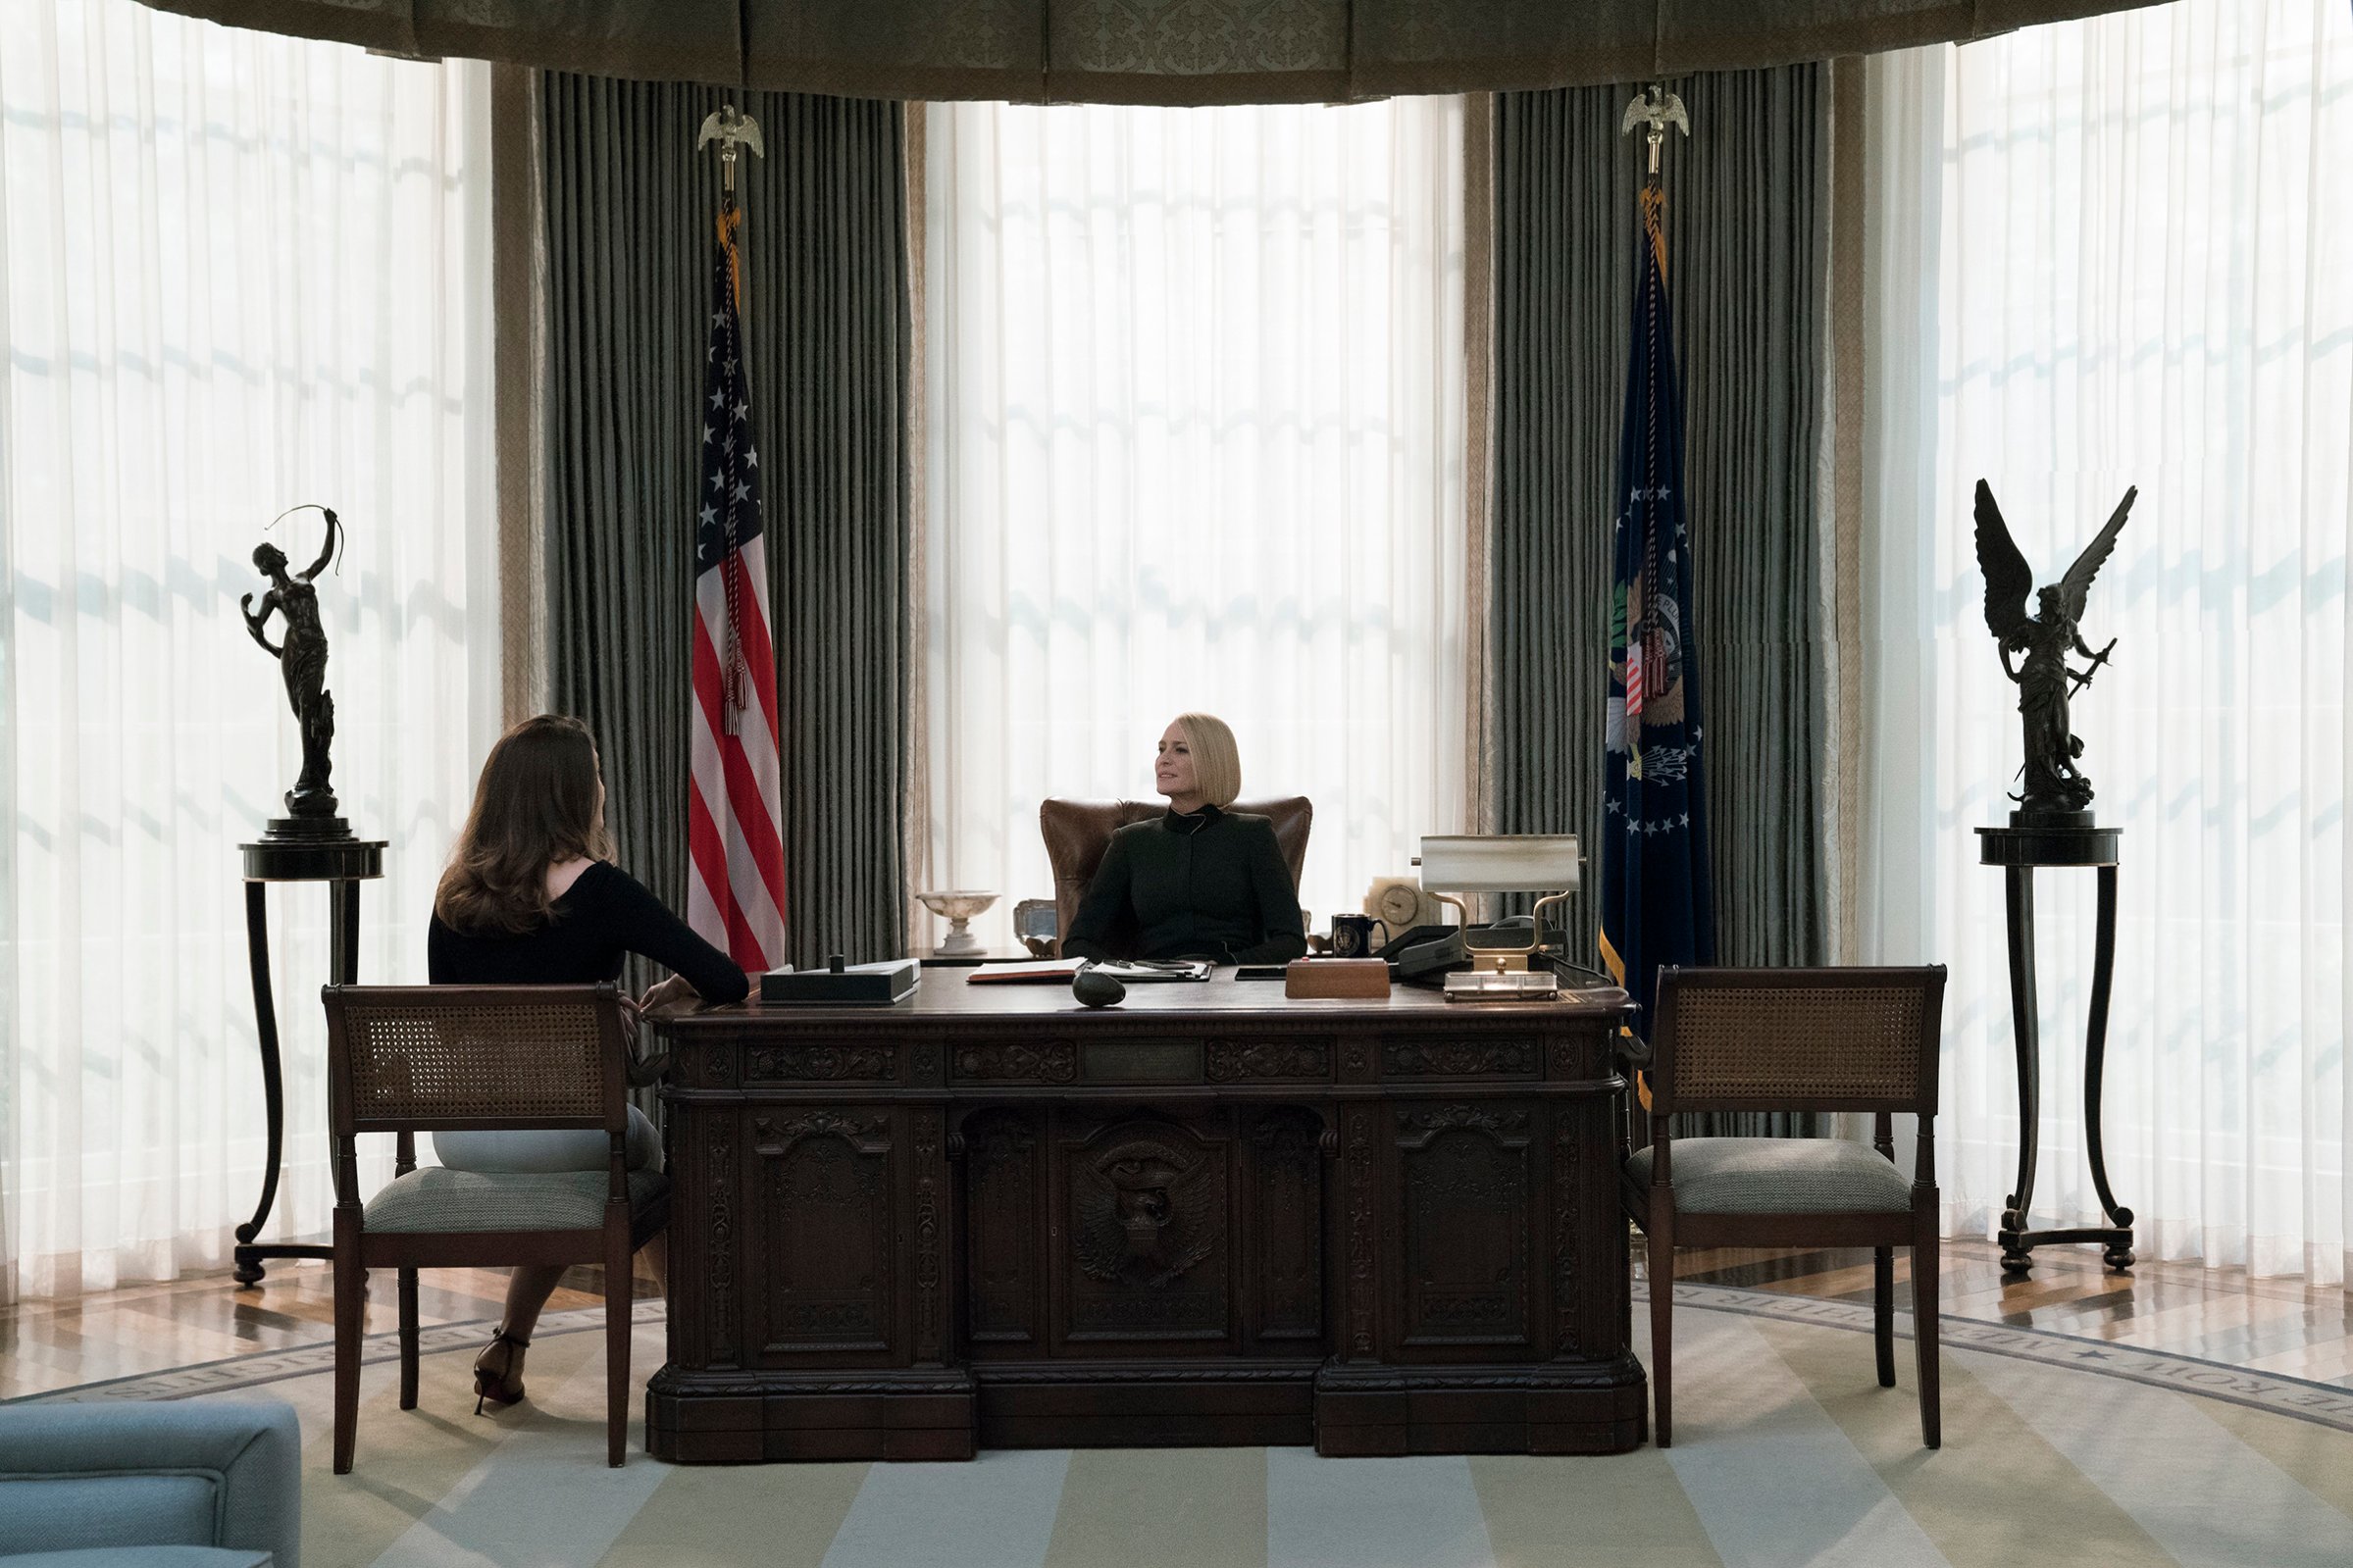 Robin Wright’s Claire Underwood assumes the presidency on House of Cards but still has to live in her husband’s shadow